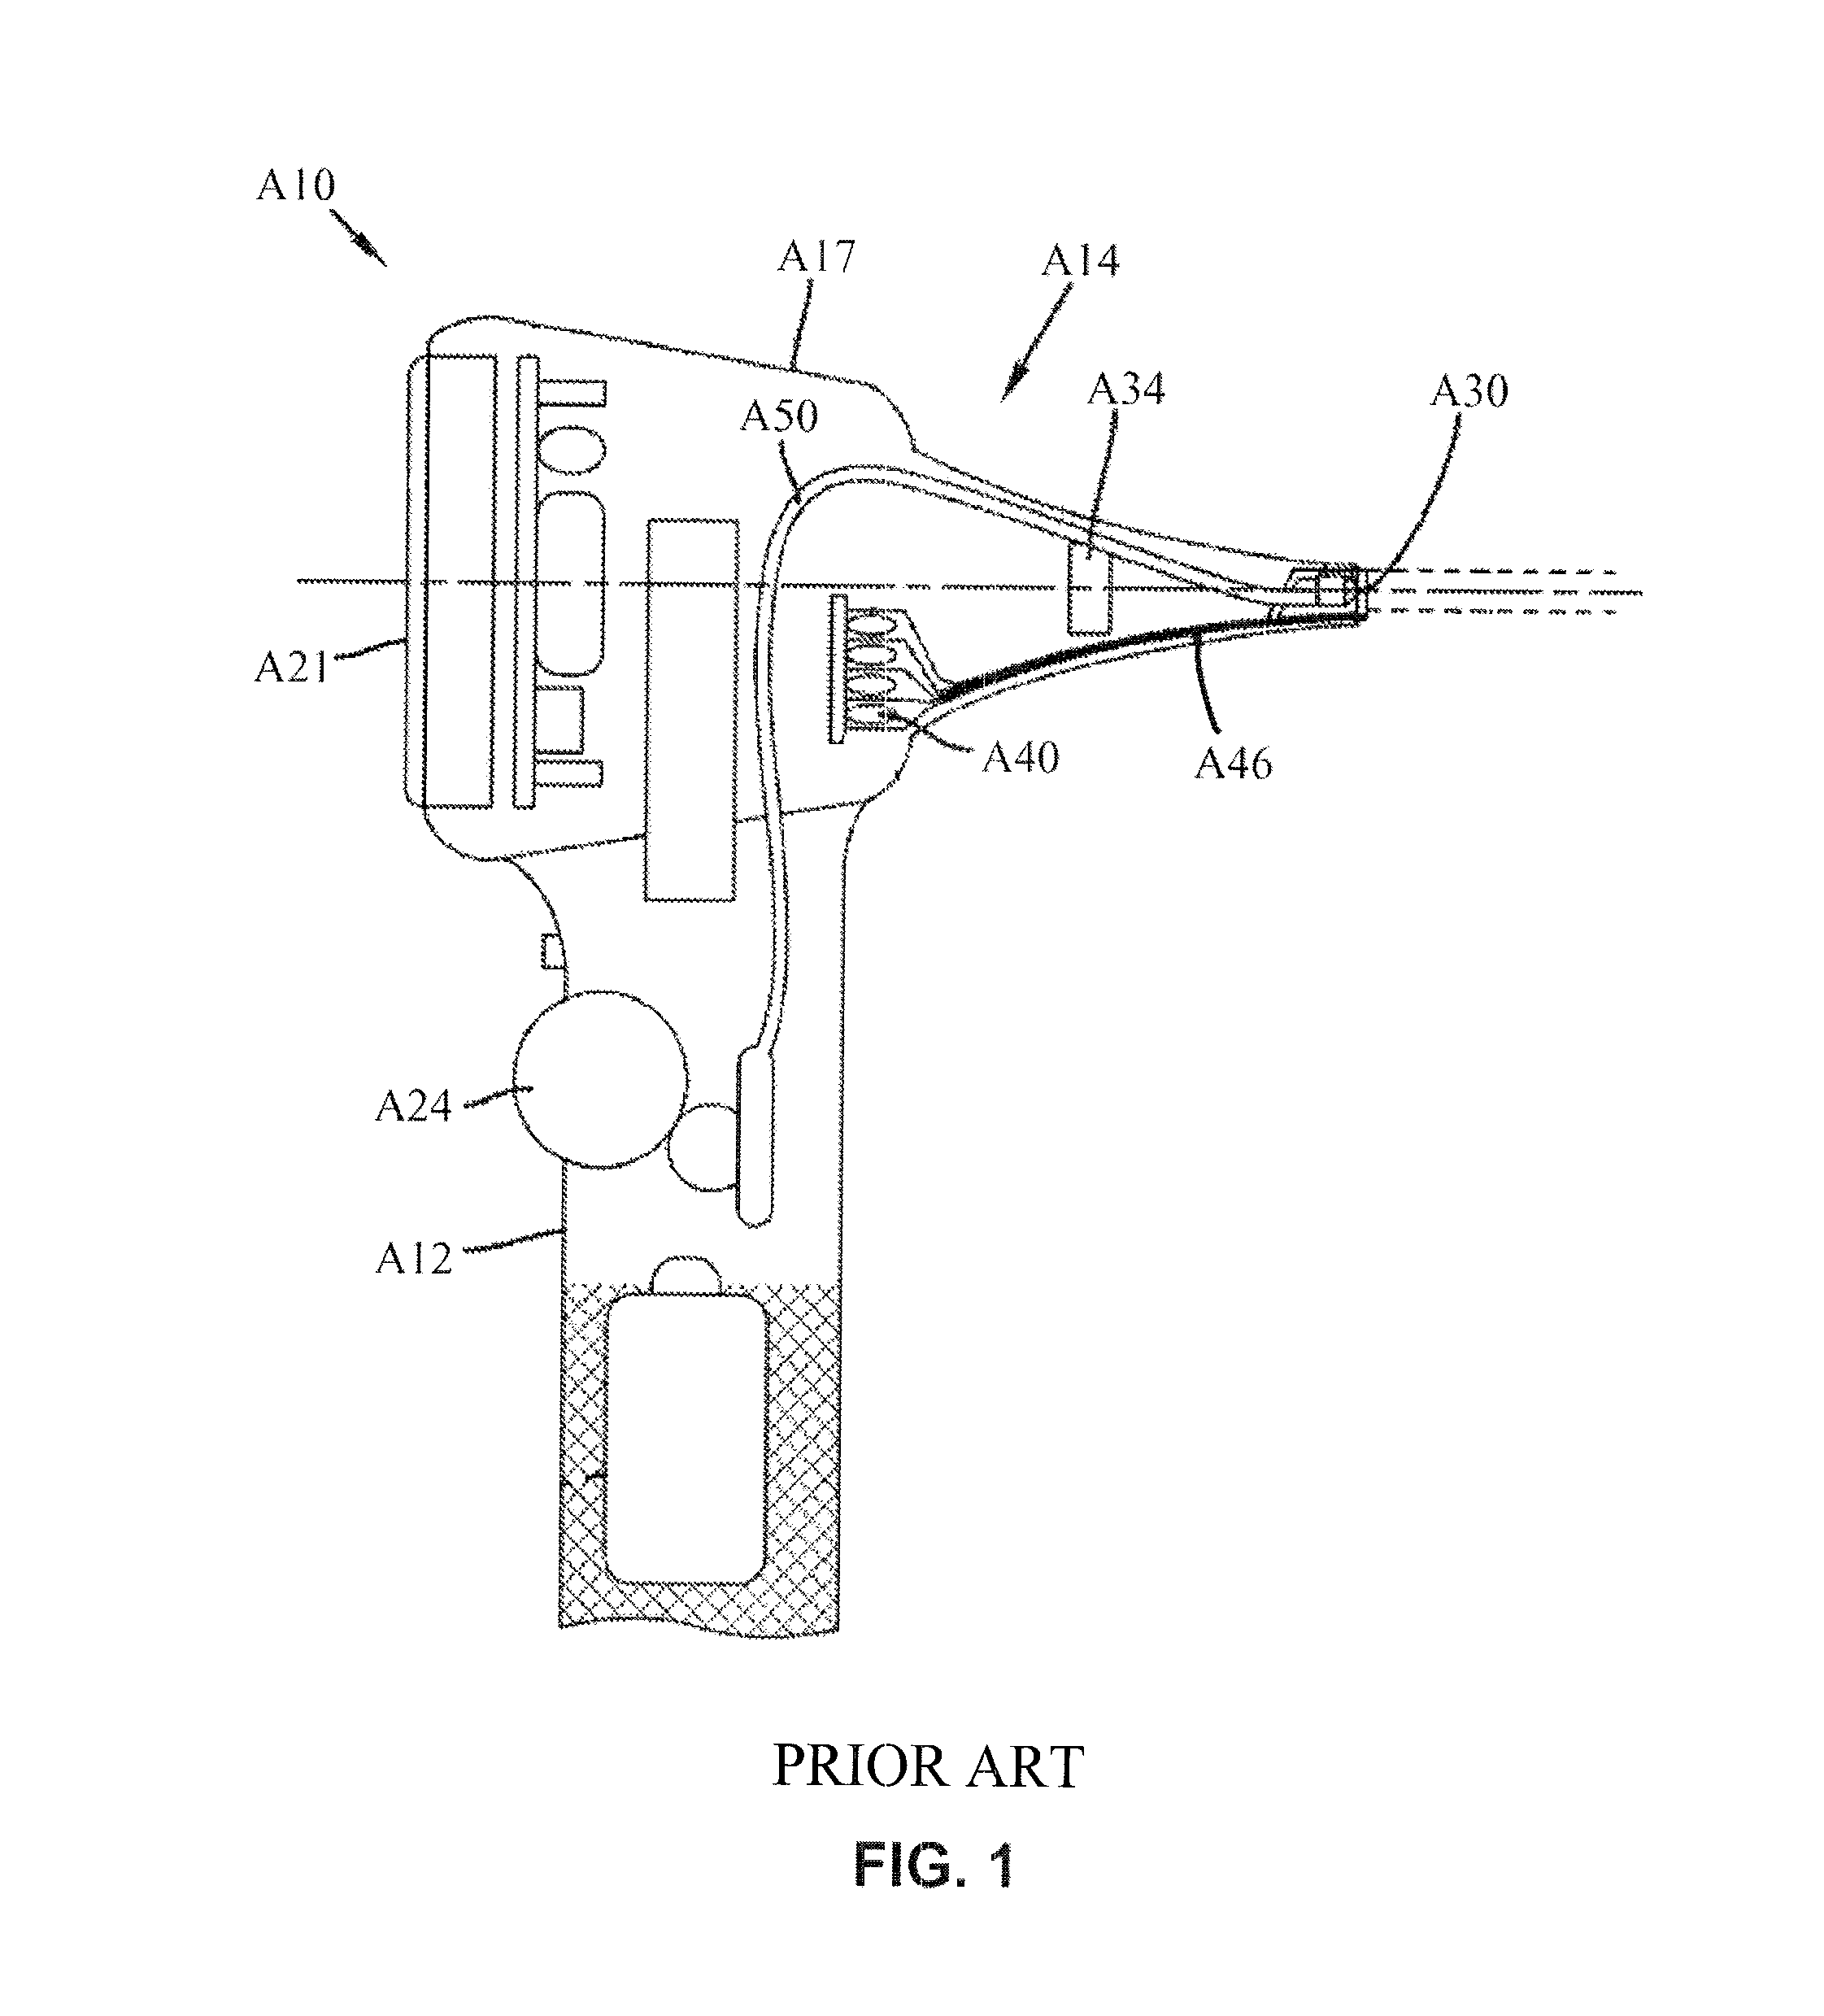 Medical inspection device